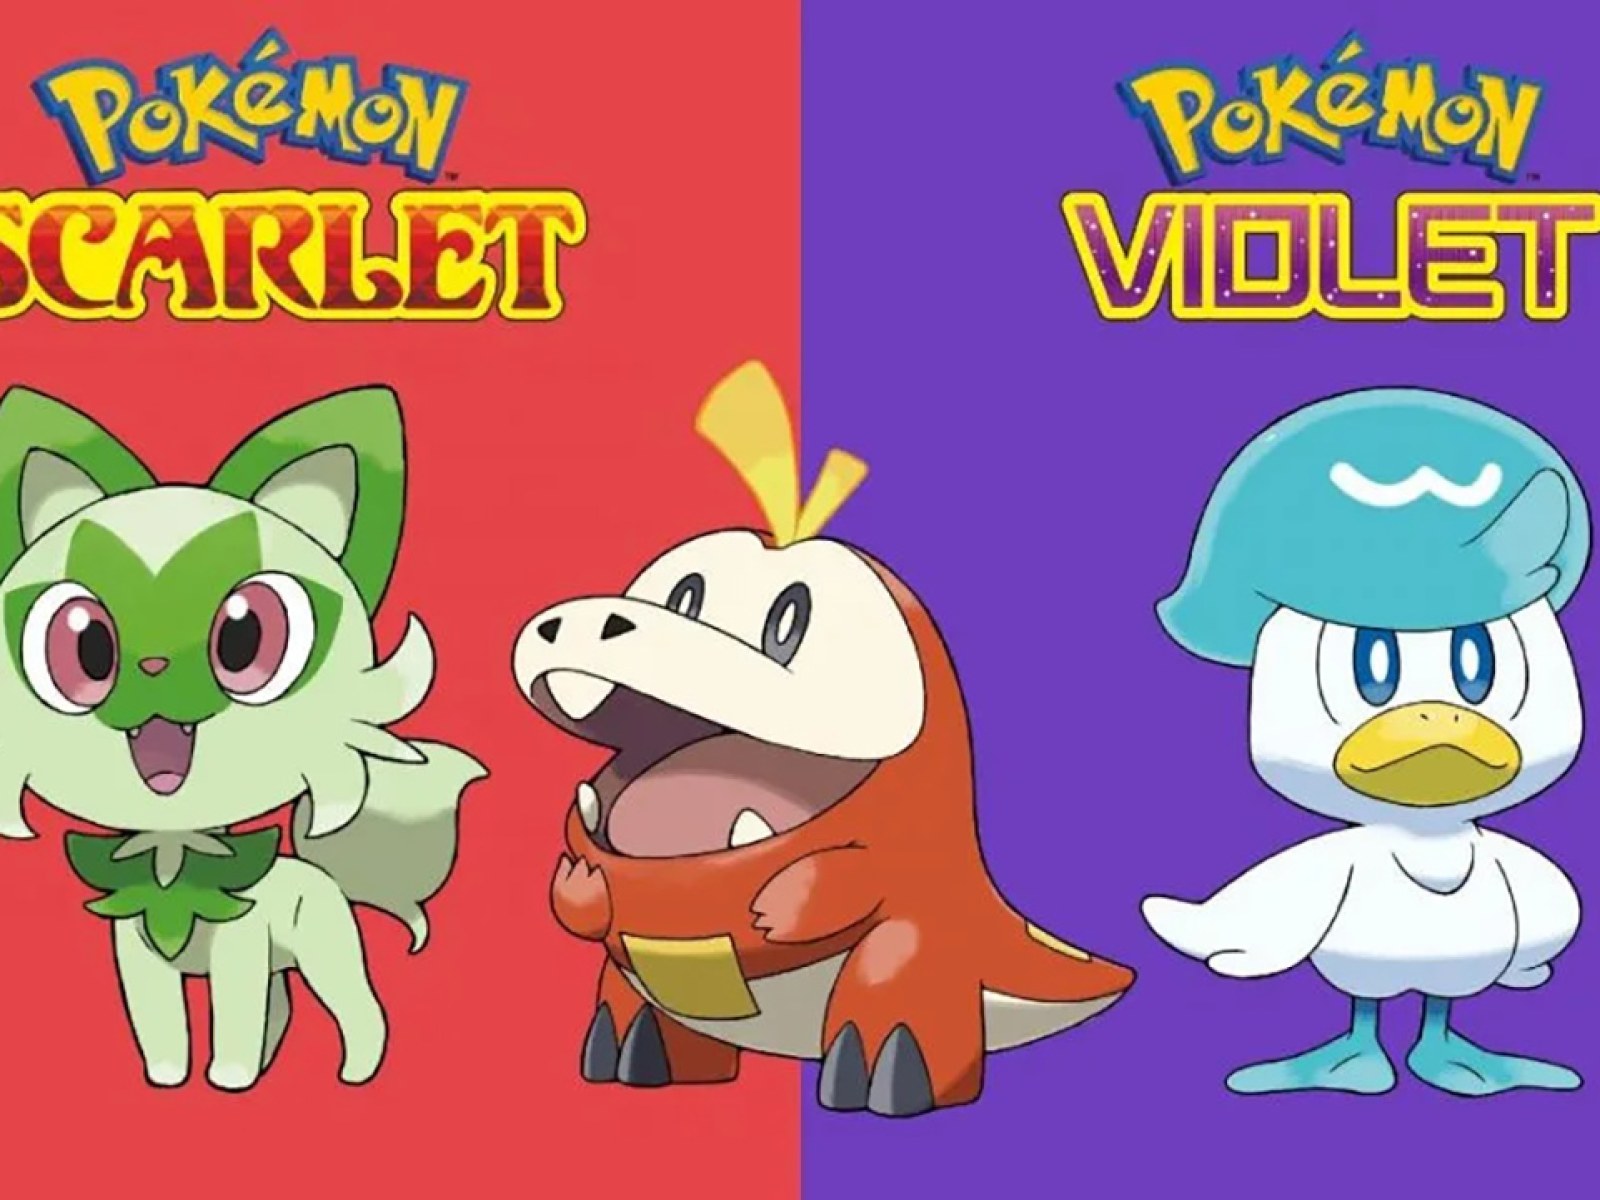 Pokémon Scarlet and Violet: Release date, new starters and what to expect